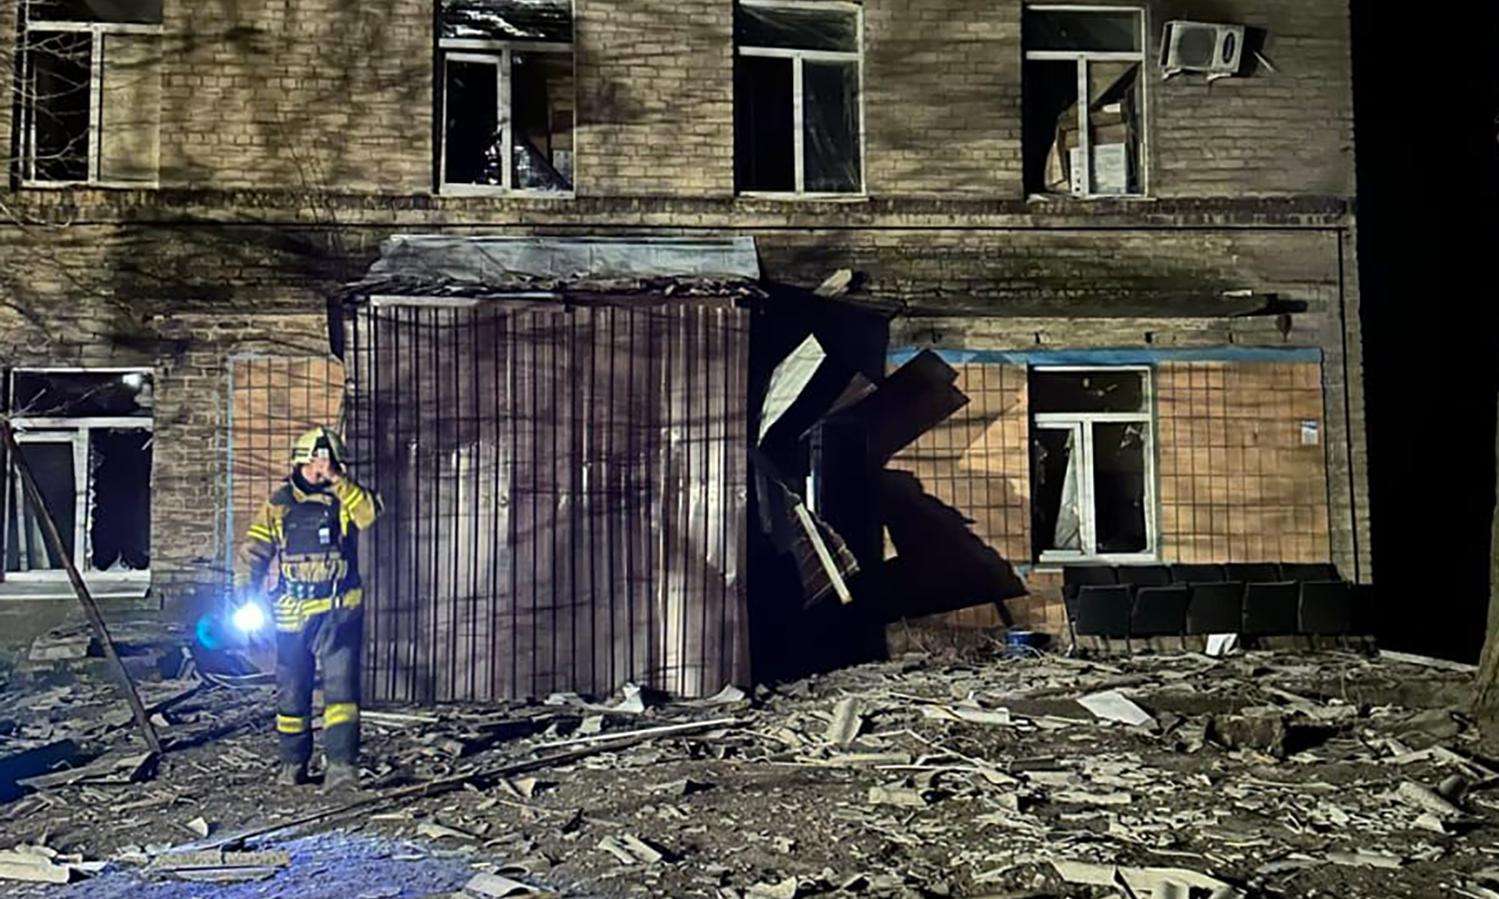 Damage from shelling to a health facility in Ukraine.